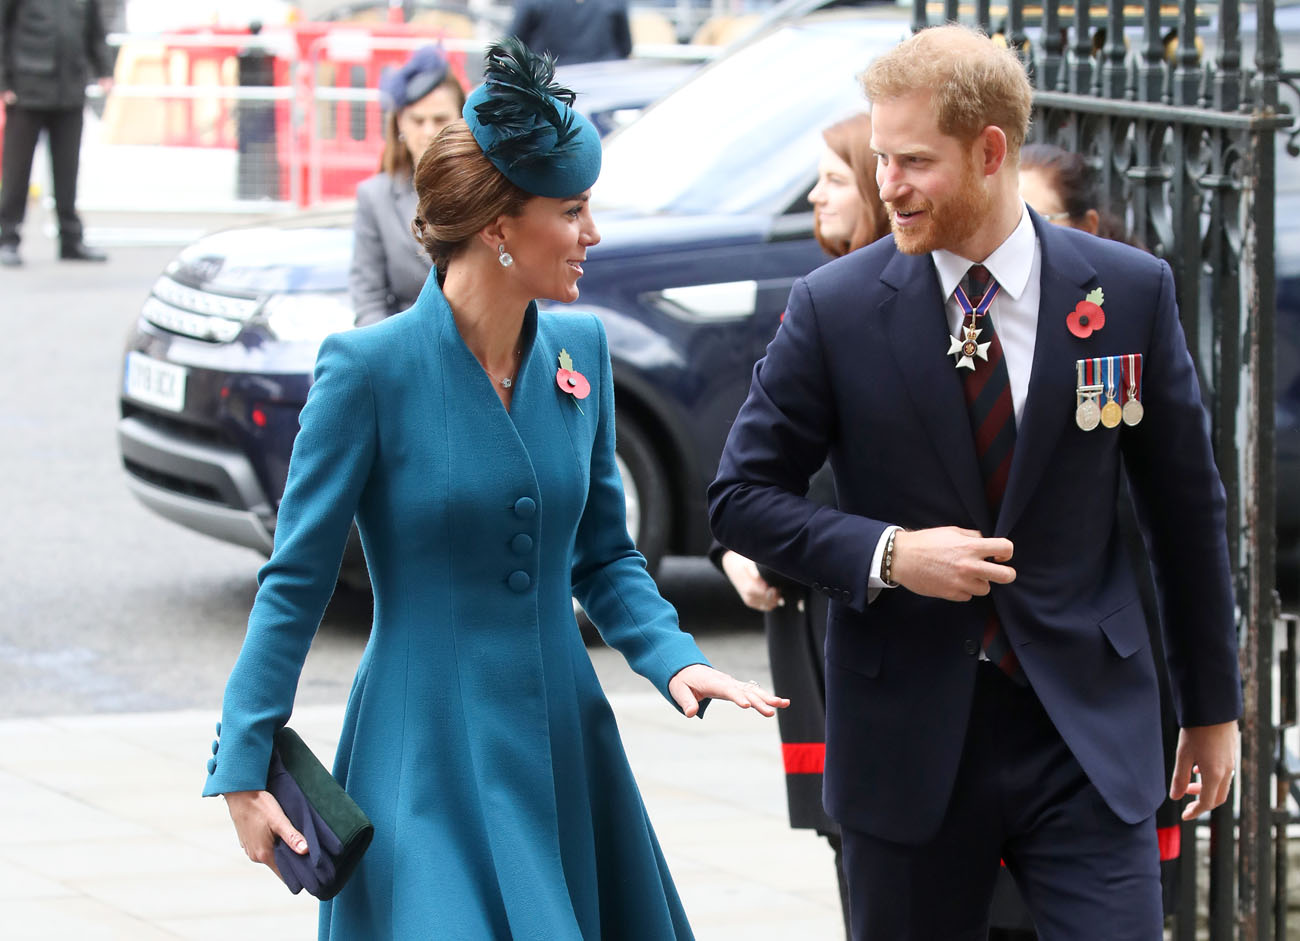 Kate Middleton wearing a teal jacket walking next to Prince Harry in a suit